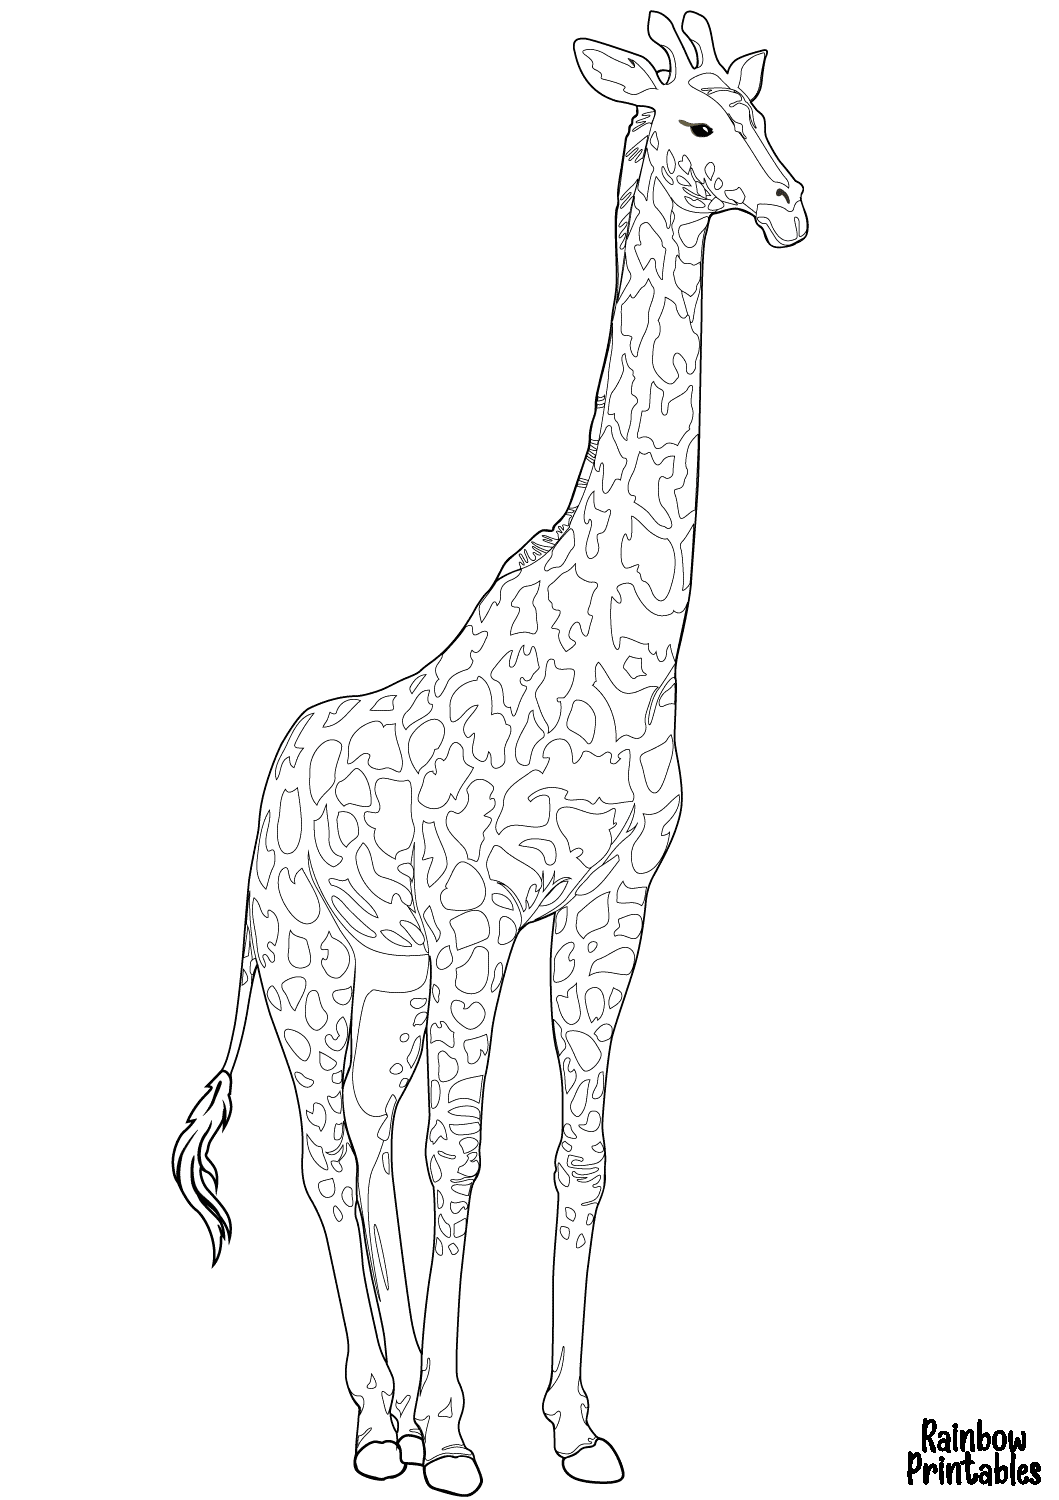 SIMPLE-EASY-line-drawings-CUTE-GIRAFFE-coloring-page-for-kids